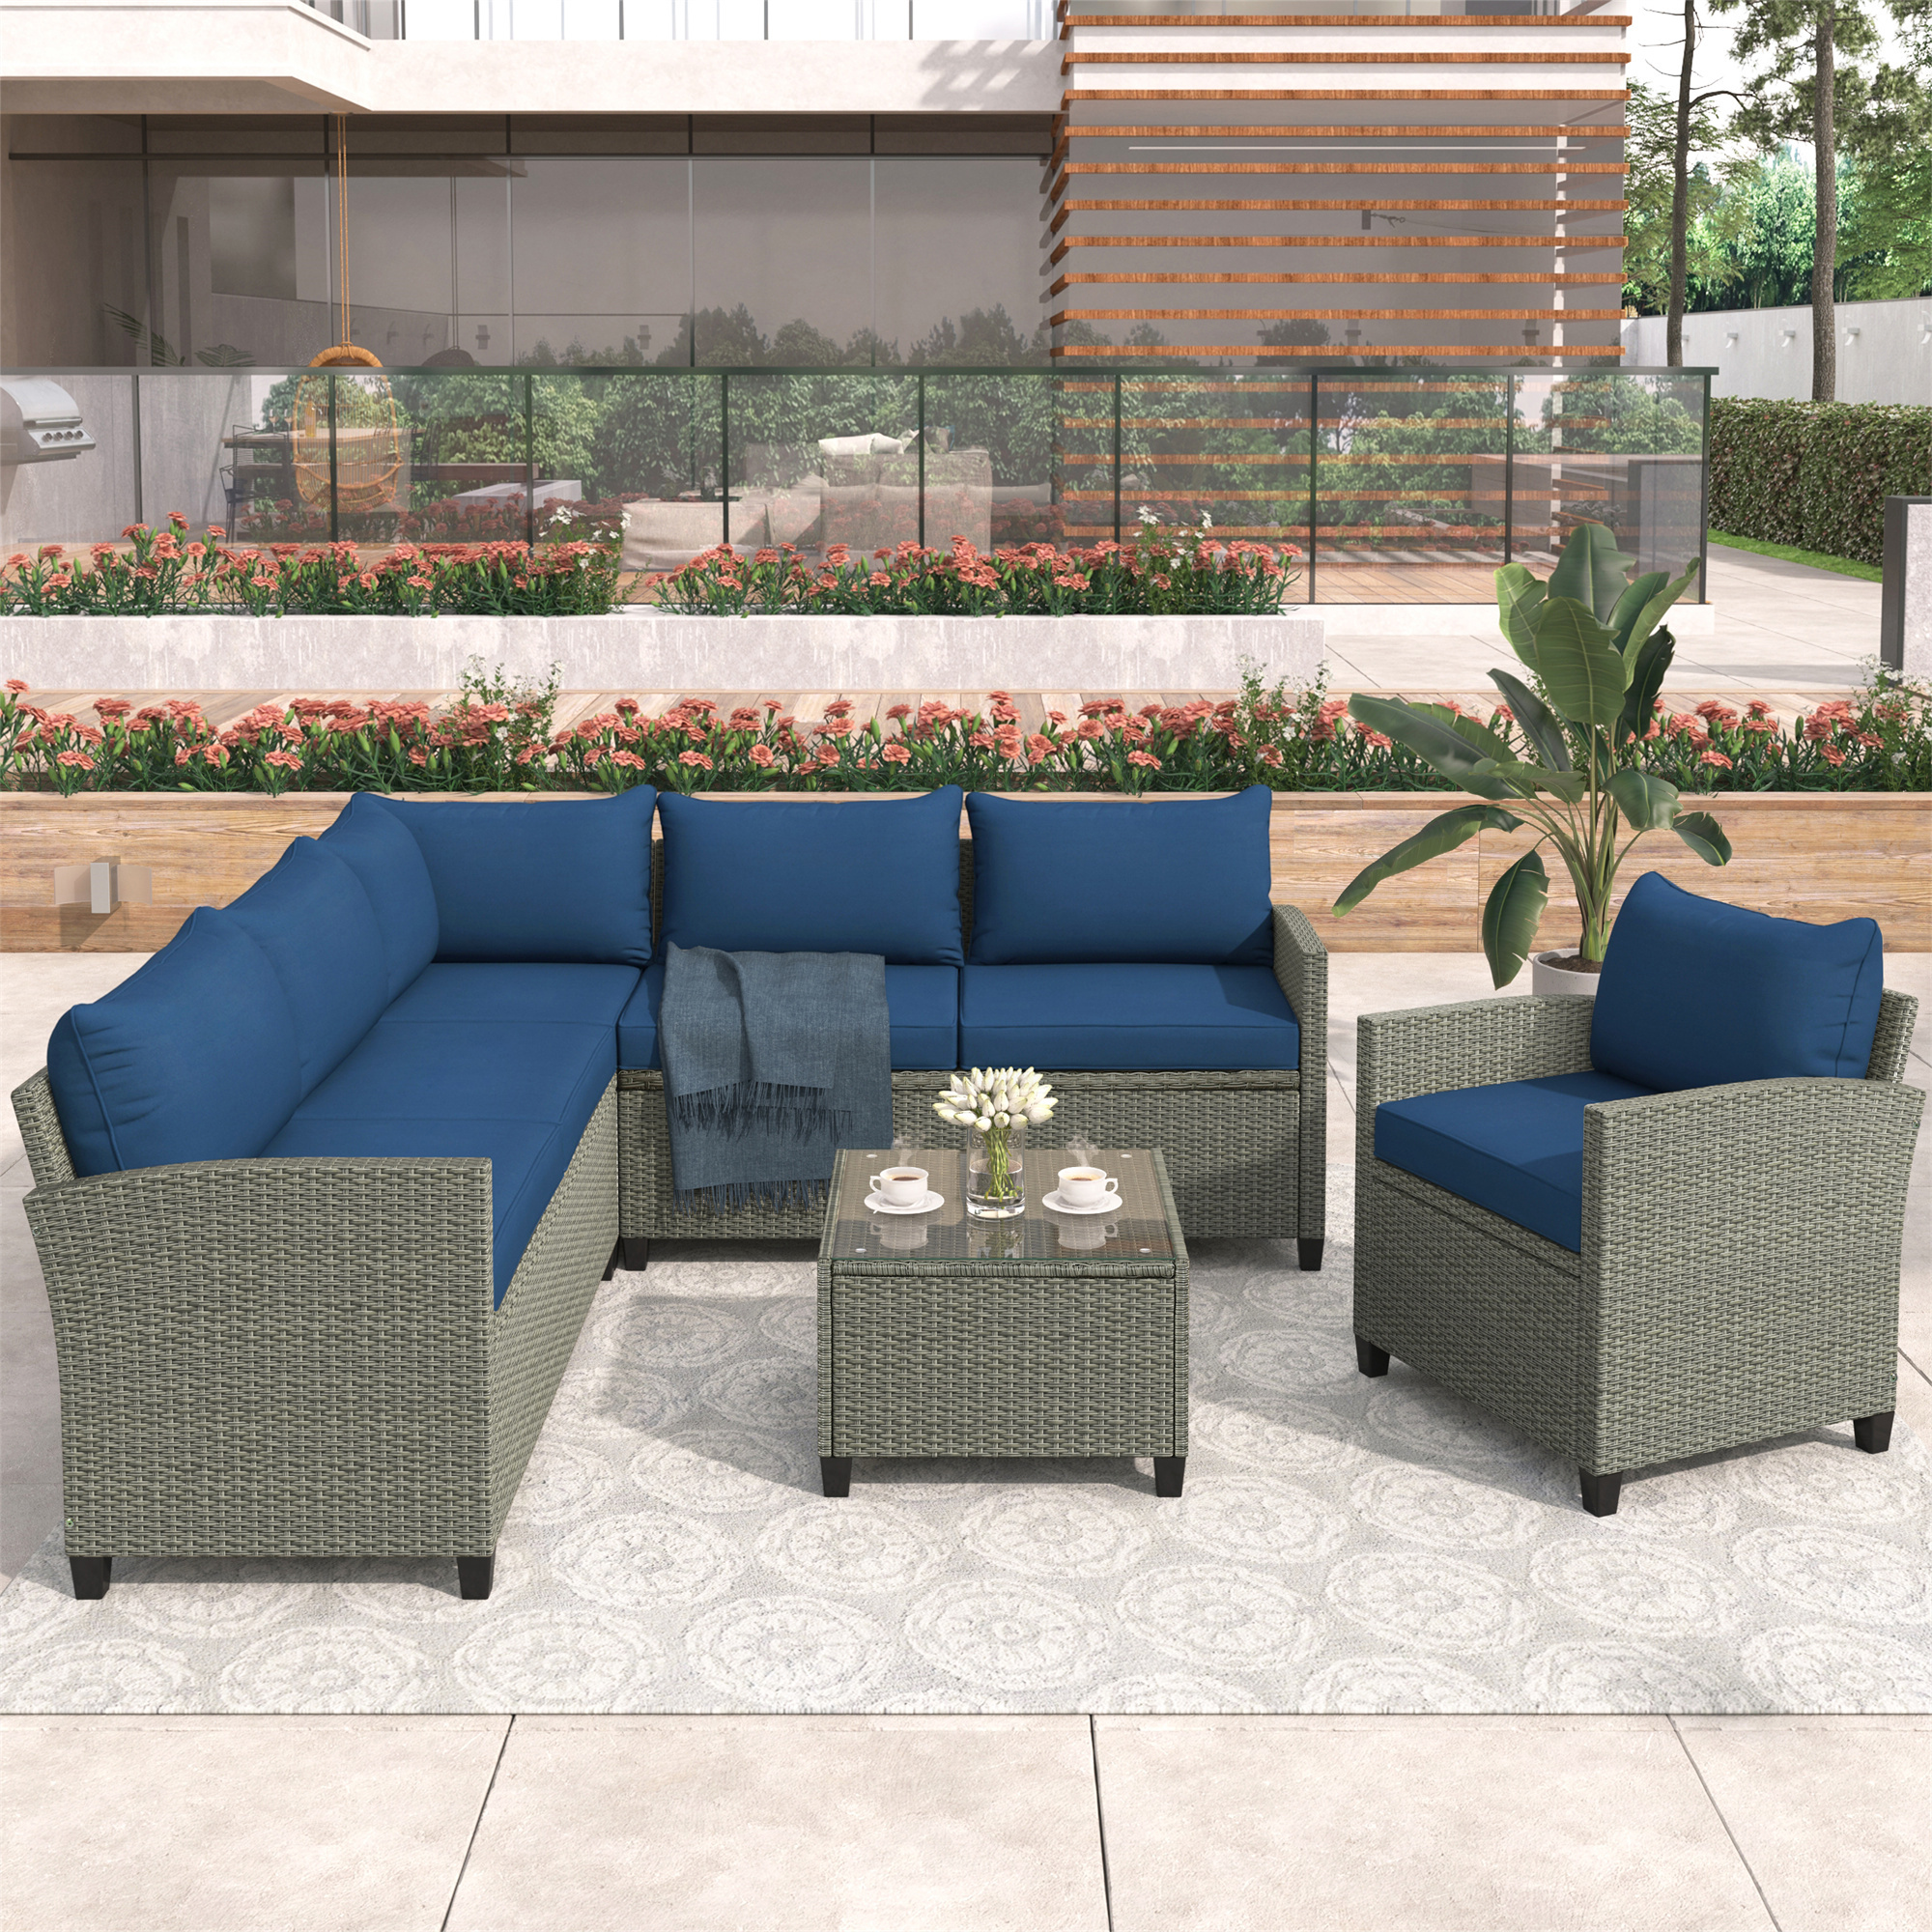 Cfowner 5-Piece Patio Furniture Sets, Outdoor Conversation Set with Coffee Table, Cushions and Single Chair, Garden Furniture Sofa Set for Garden Balcony Poolside - image 1 of 9